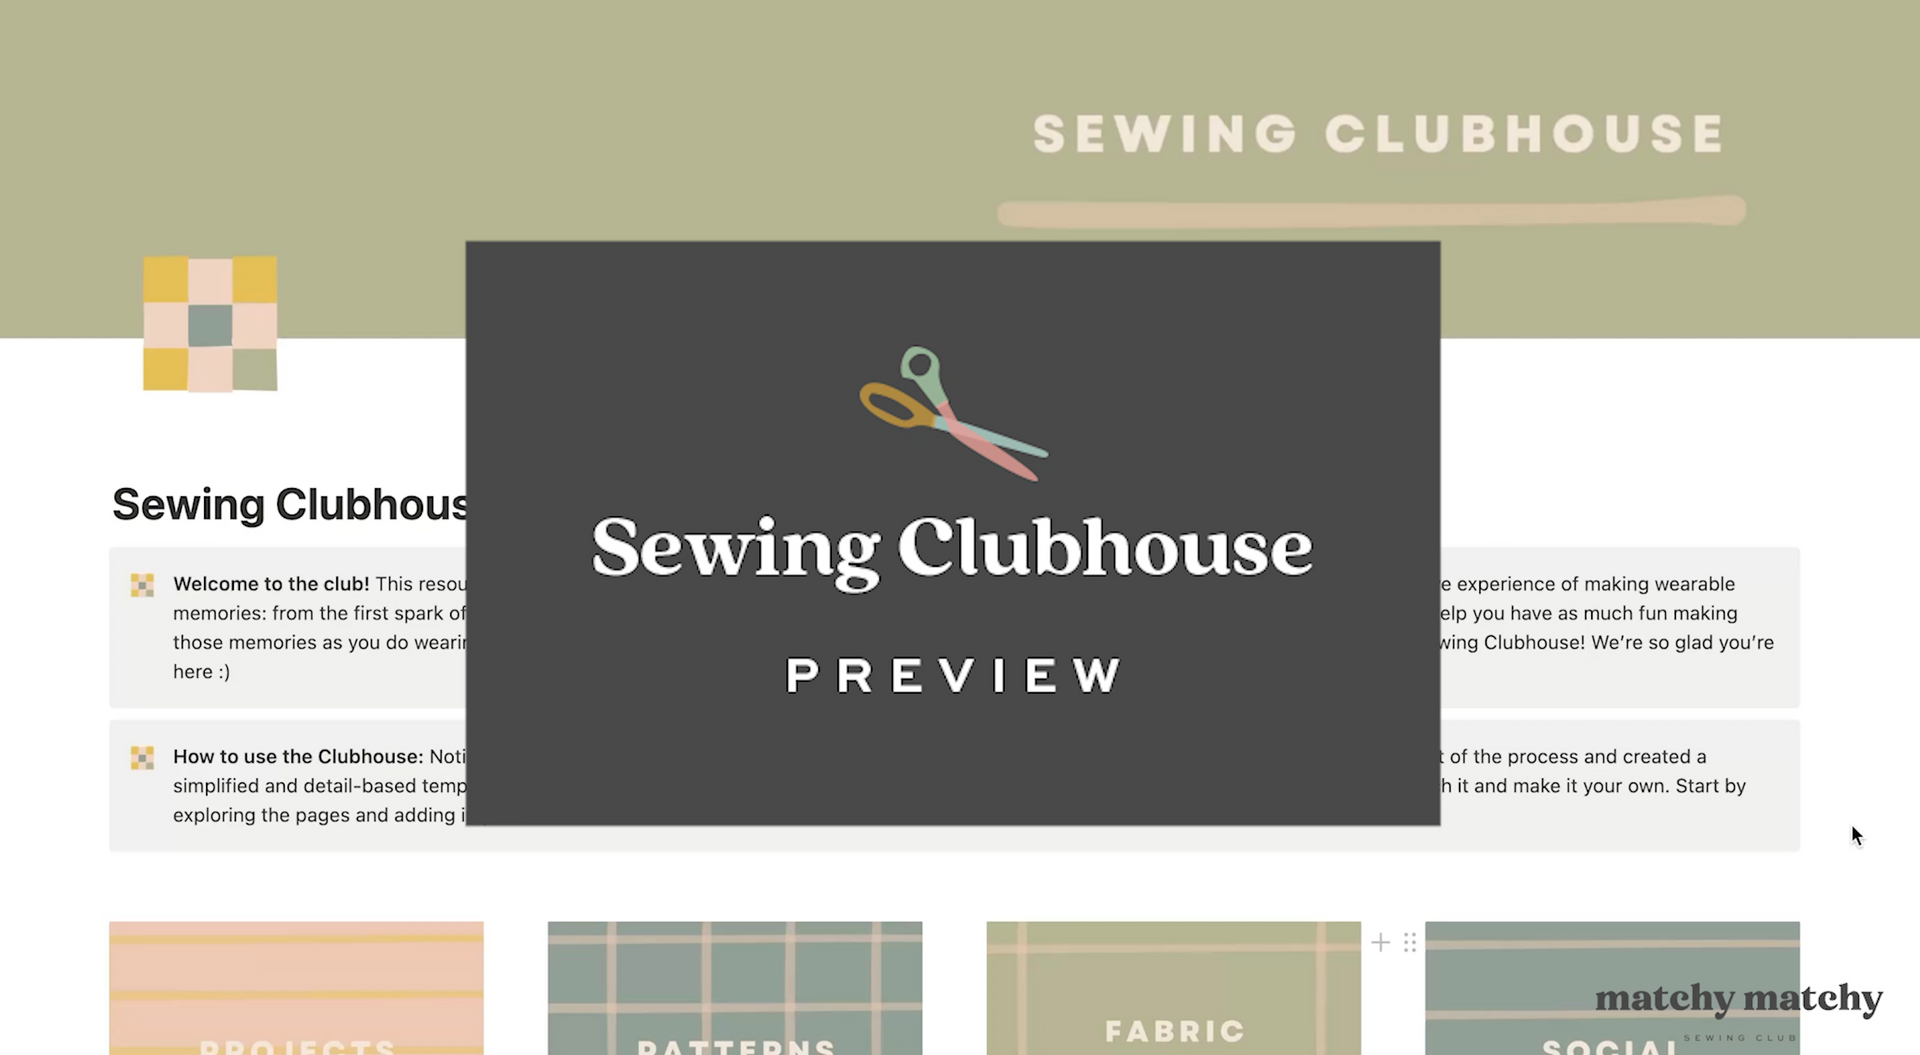 Load video: Sewing Clubhouse Notion Template Walkthrough